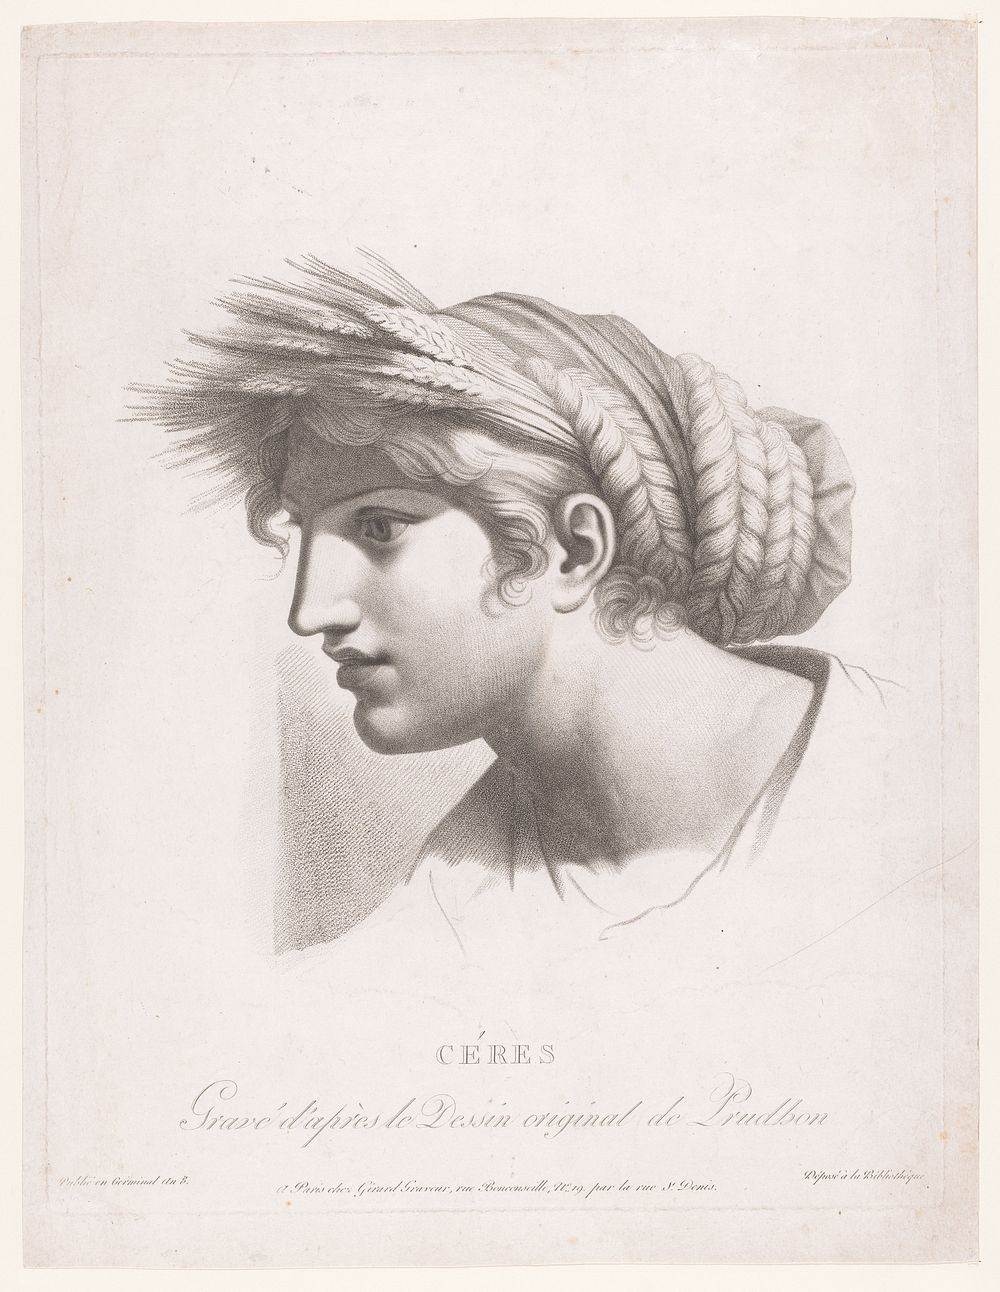 Ceres (1799 - 1800) by anonymous, Pierre Prud hon and R Girard and Cie